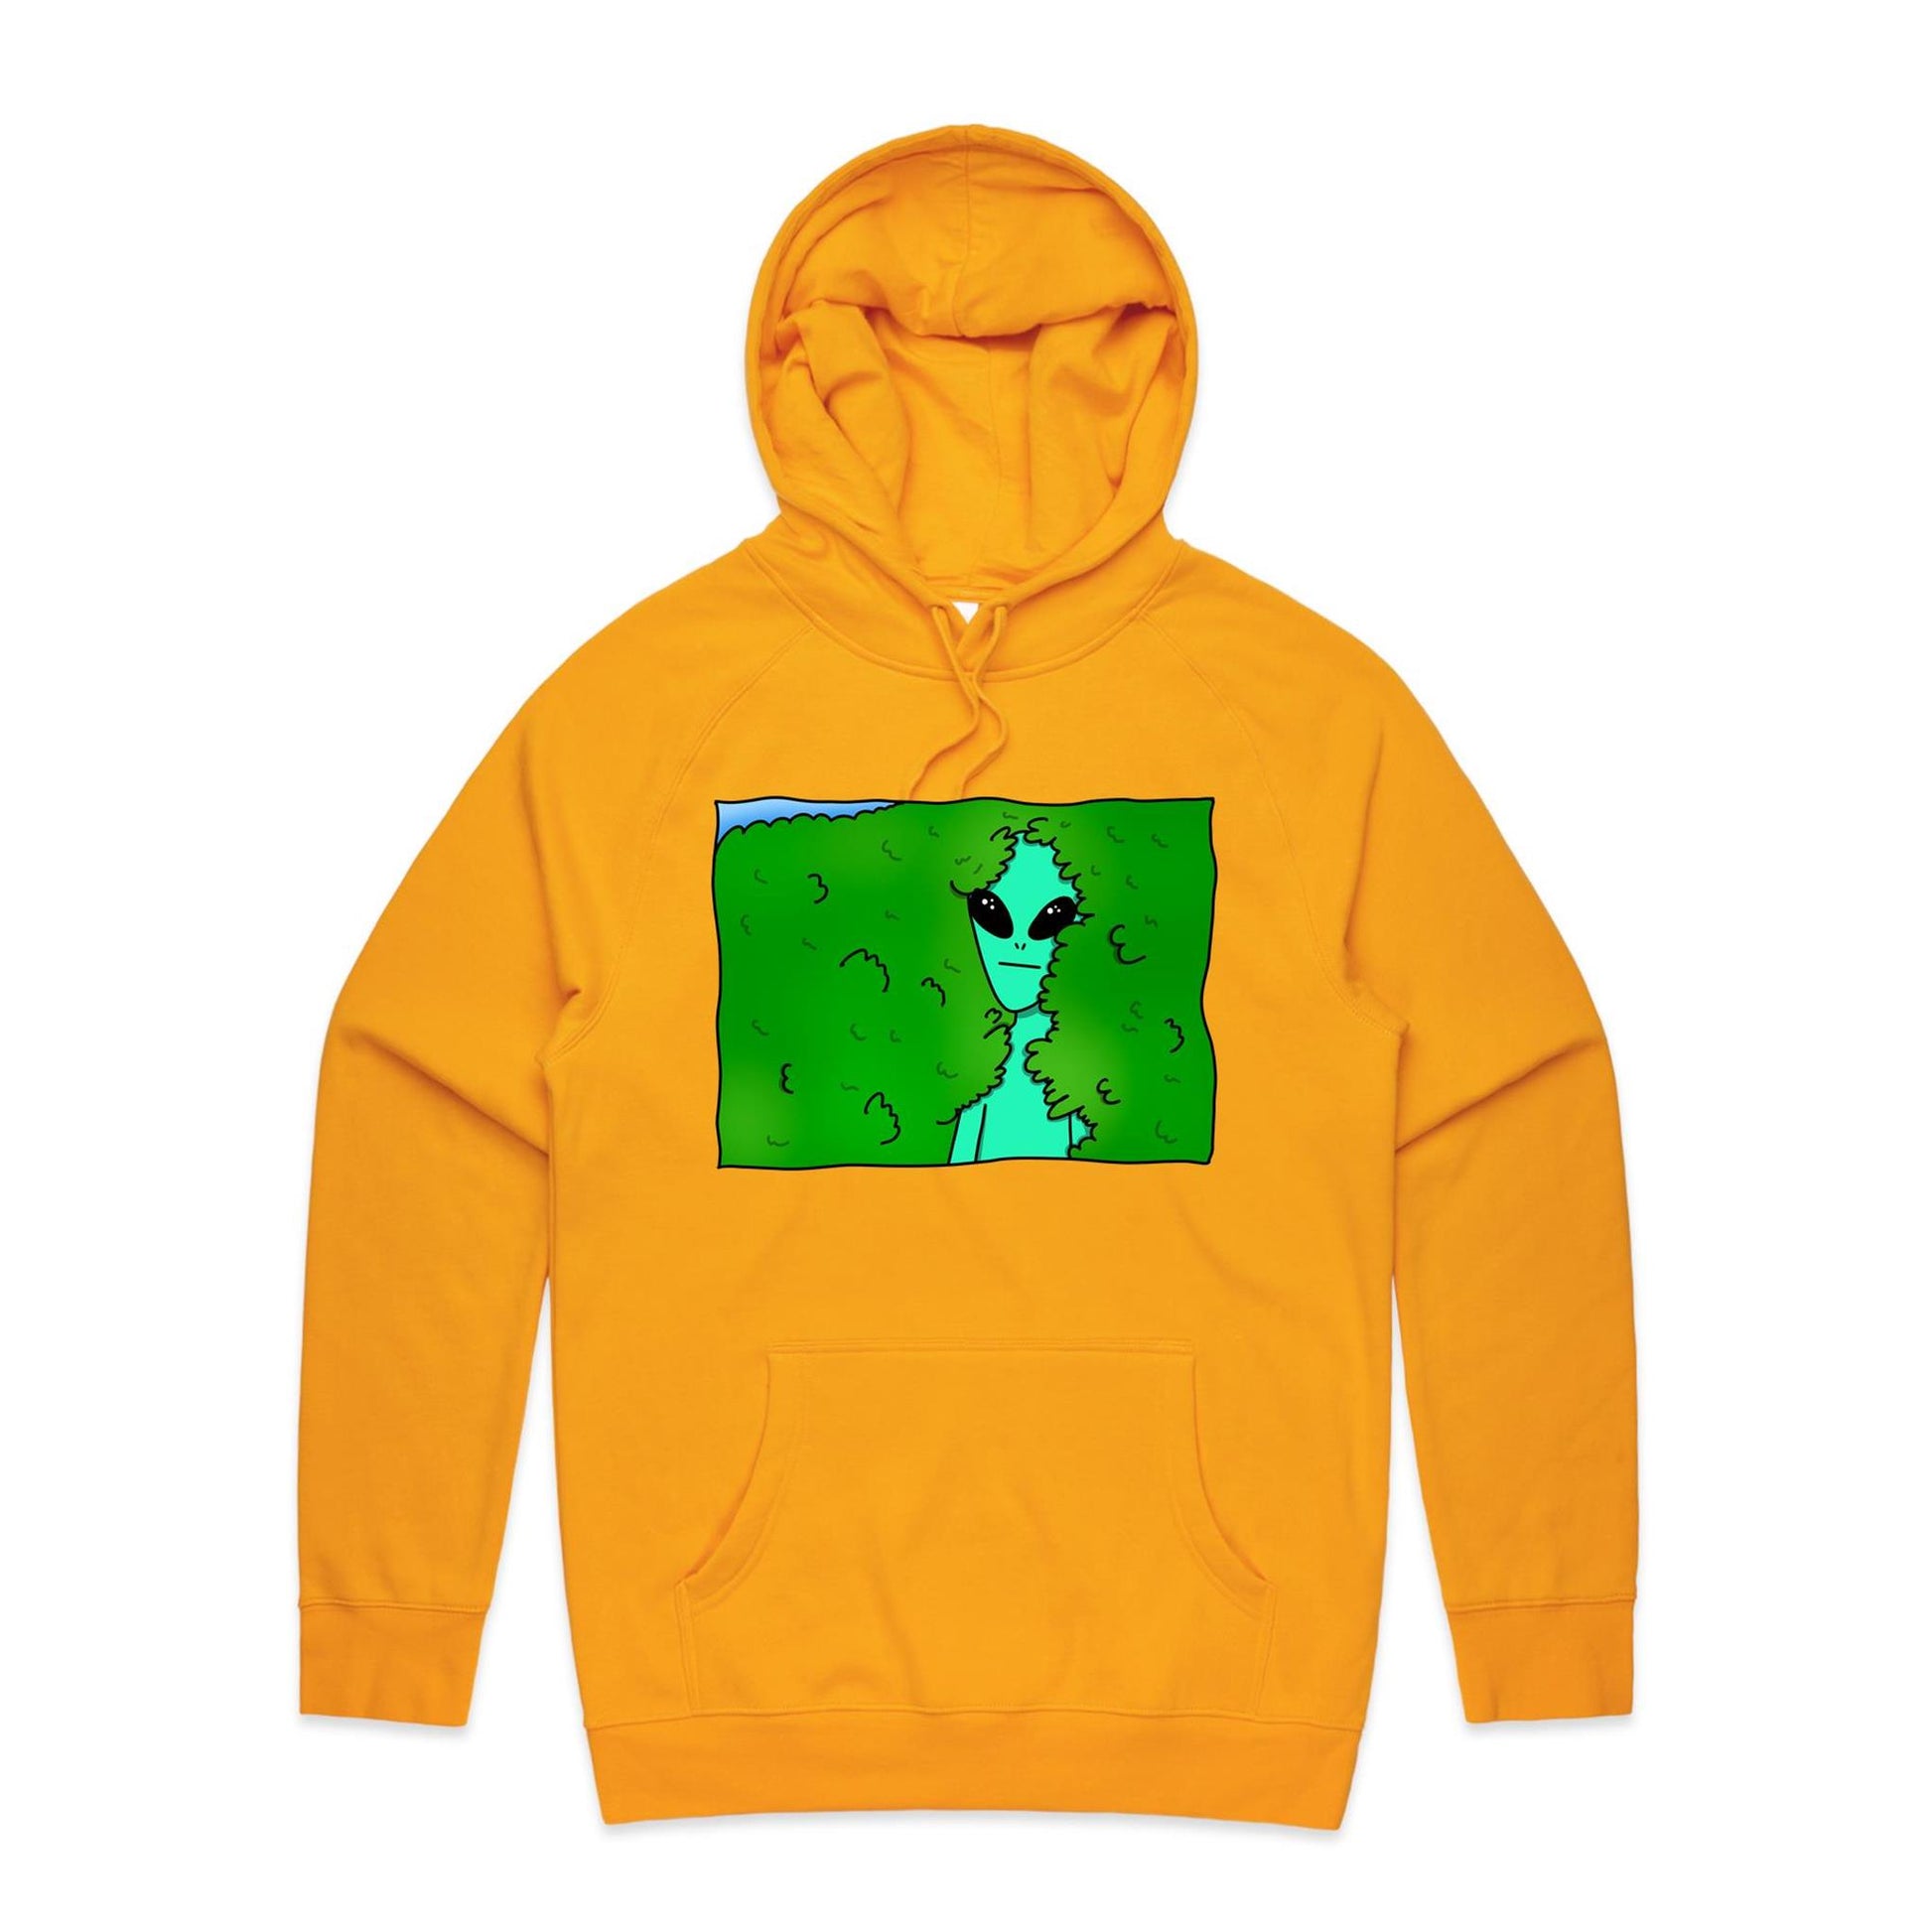 Alien Backing Into Hedge Meme - Supply Hood Gold Mens Supply Hoodie Funny Sci Fi